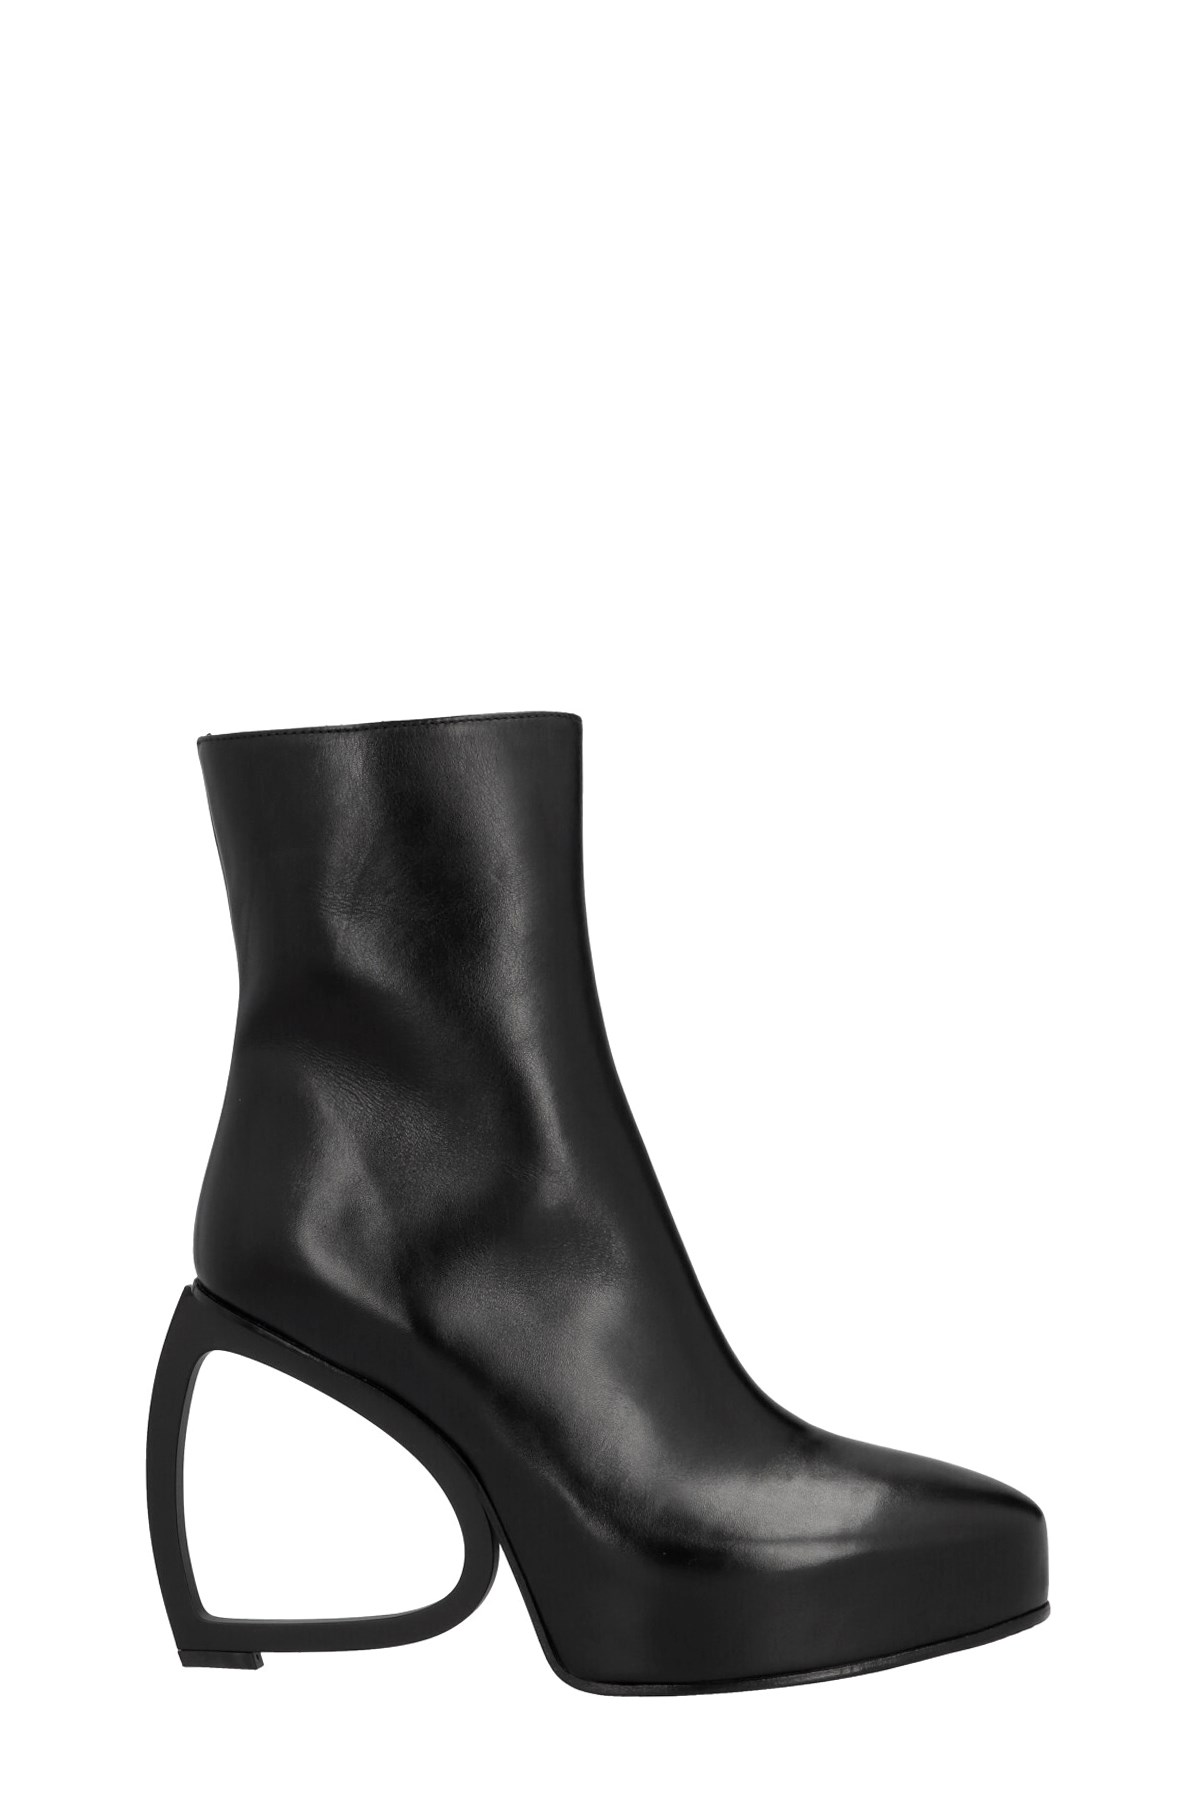 ANN DEMEULEMEESTER Rounded Heel Ankle Boot